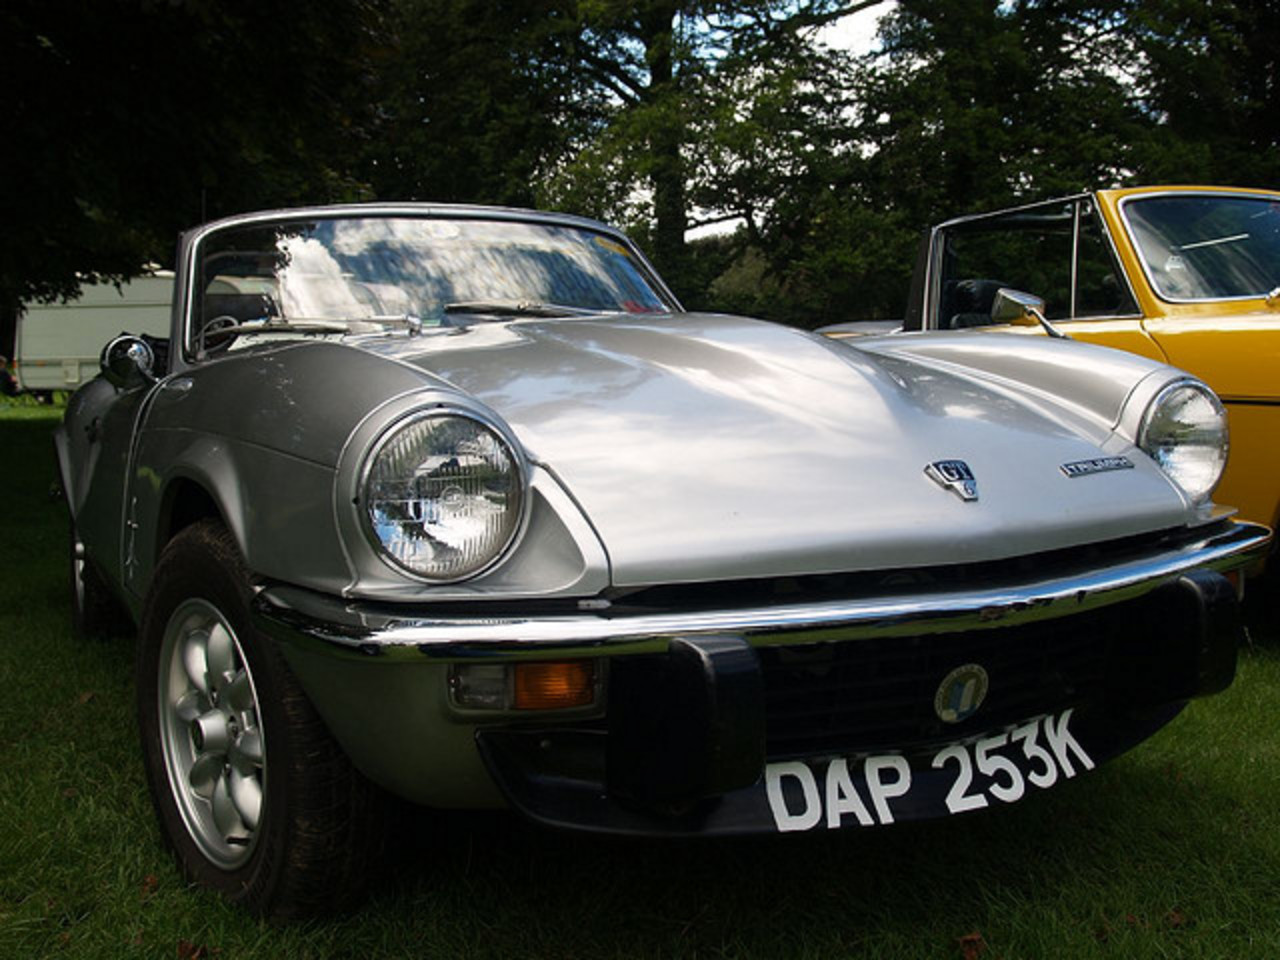 Triumph GT6 Sports Cars - 1971 | Flickr - Photo Sharing!